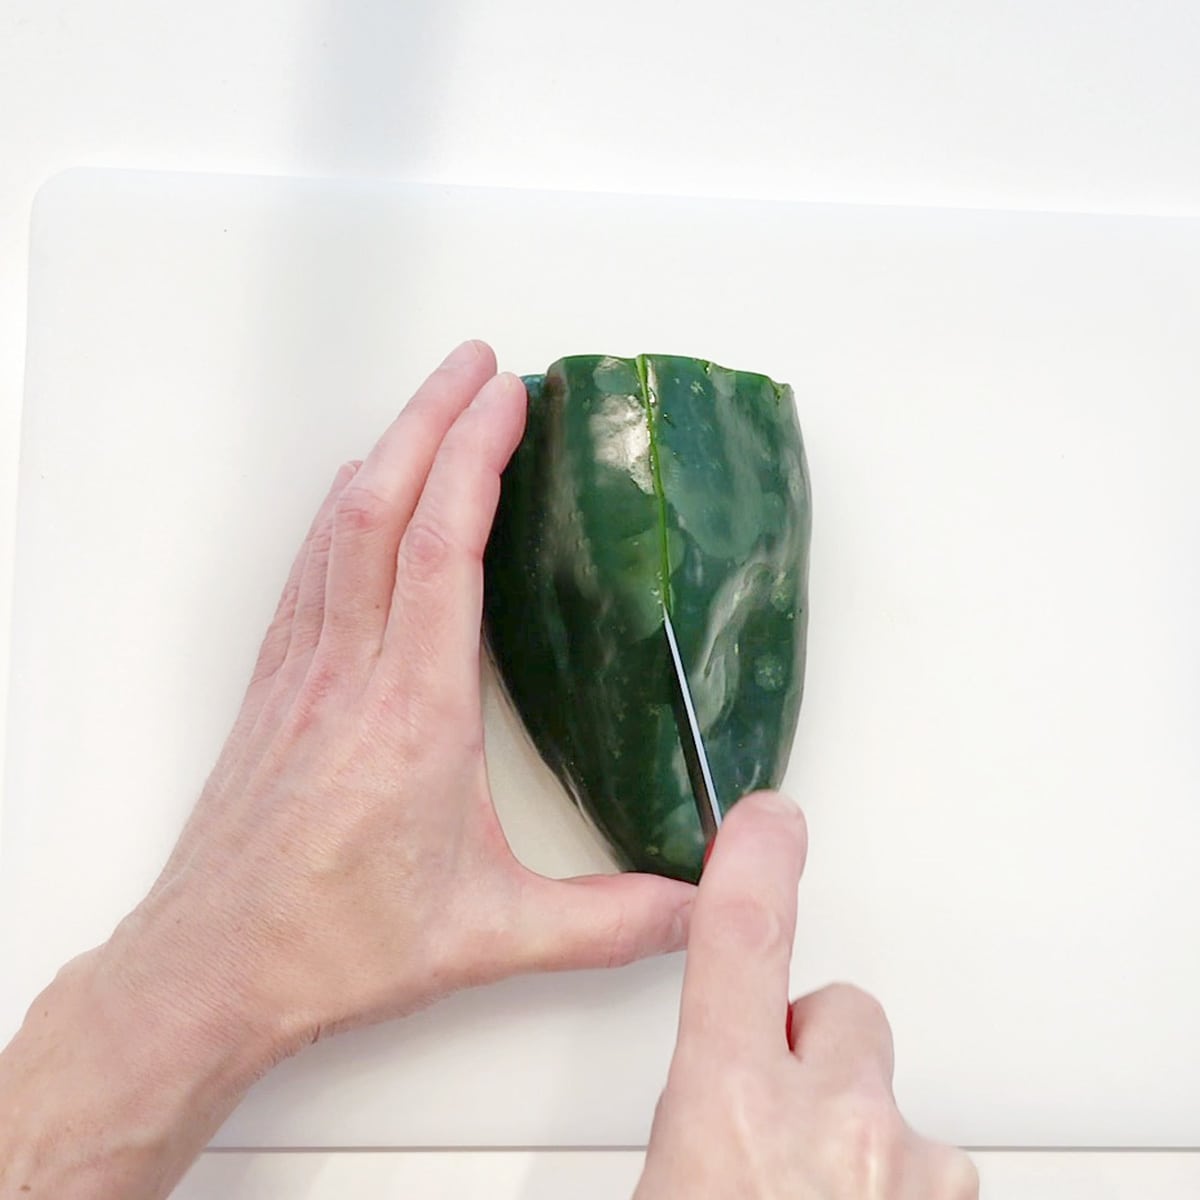 Cutting a slit down the side of a poblano pepper. 